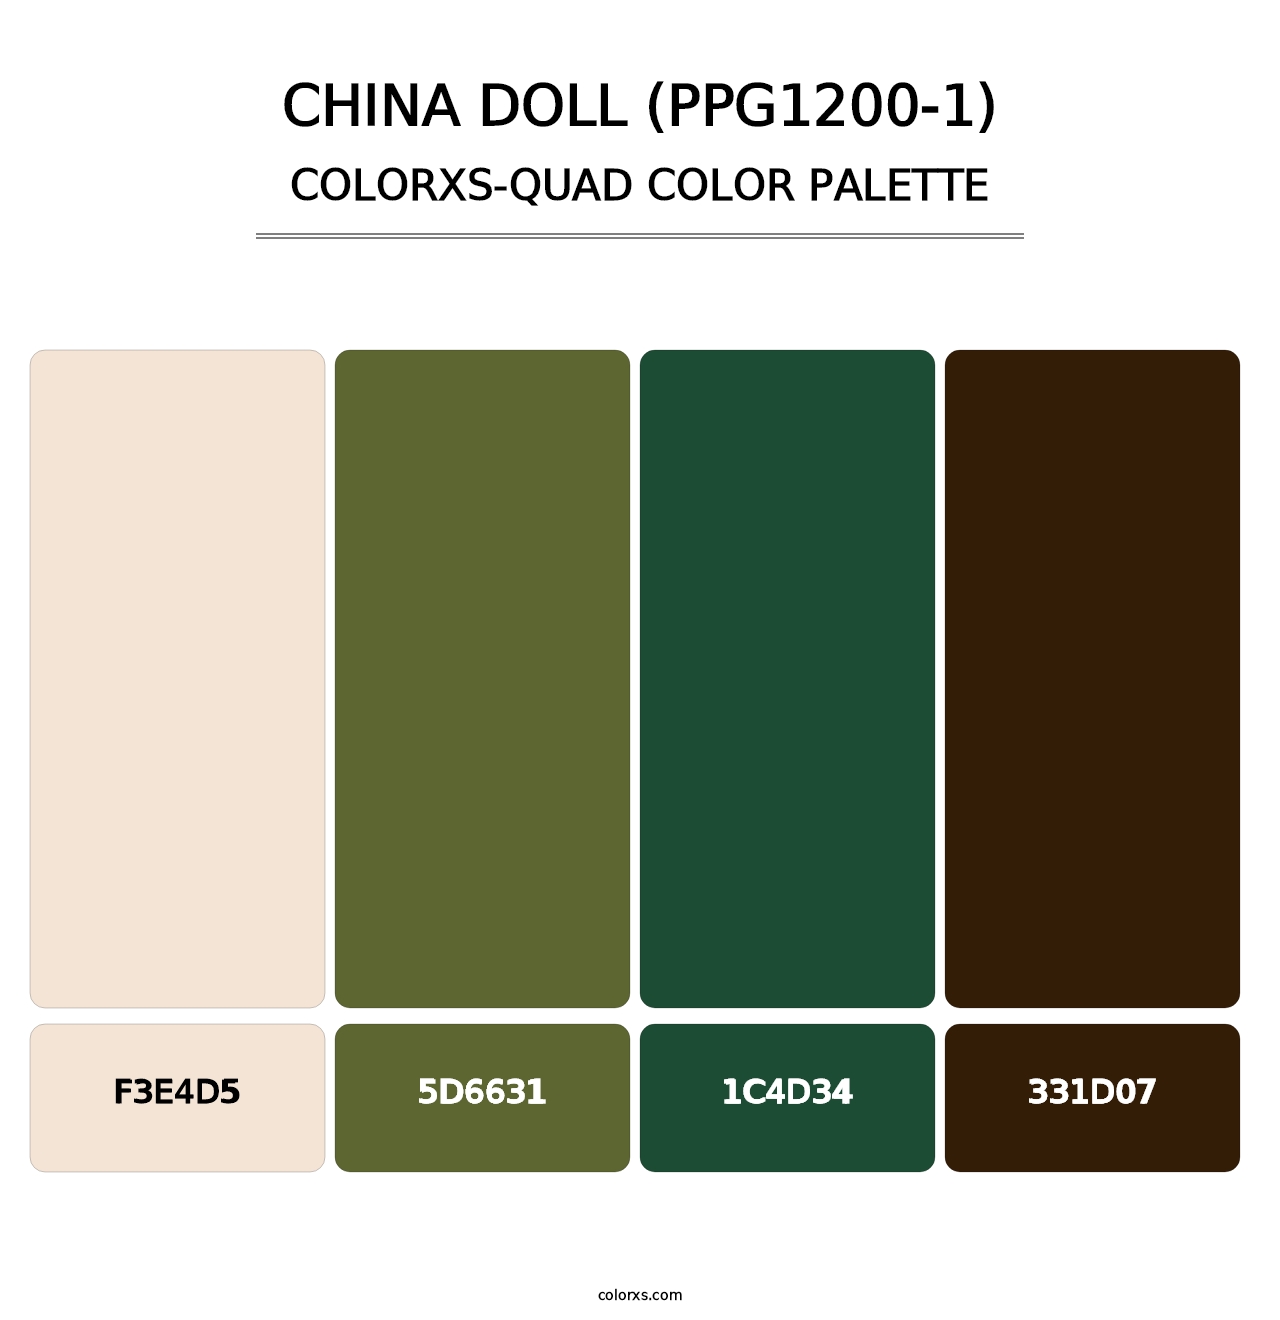 China Doll (PPG1200-1) - Colorxs Quad Palette